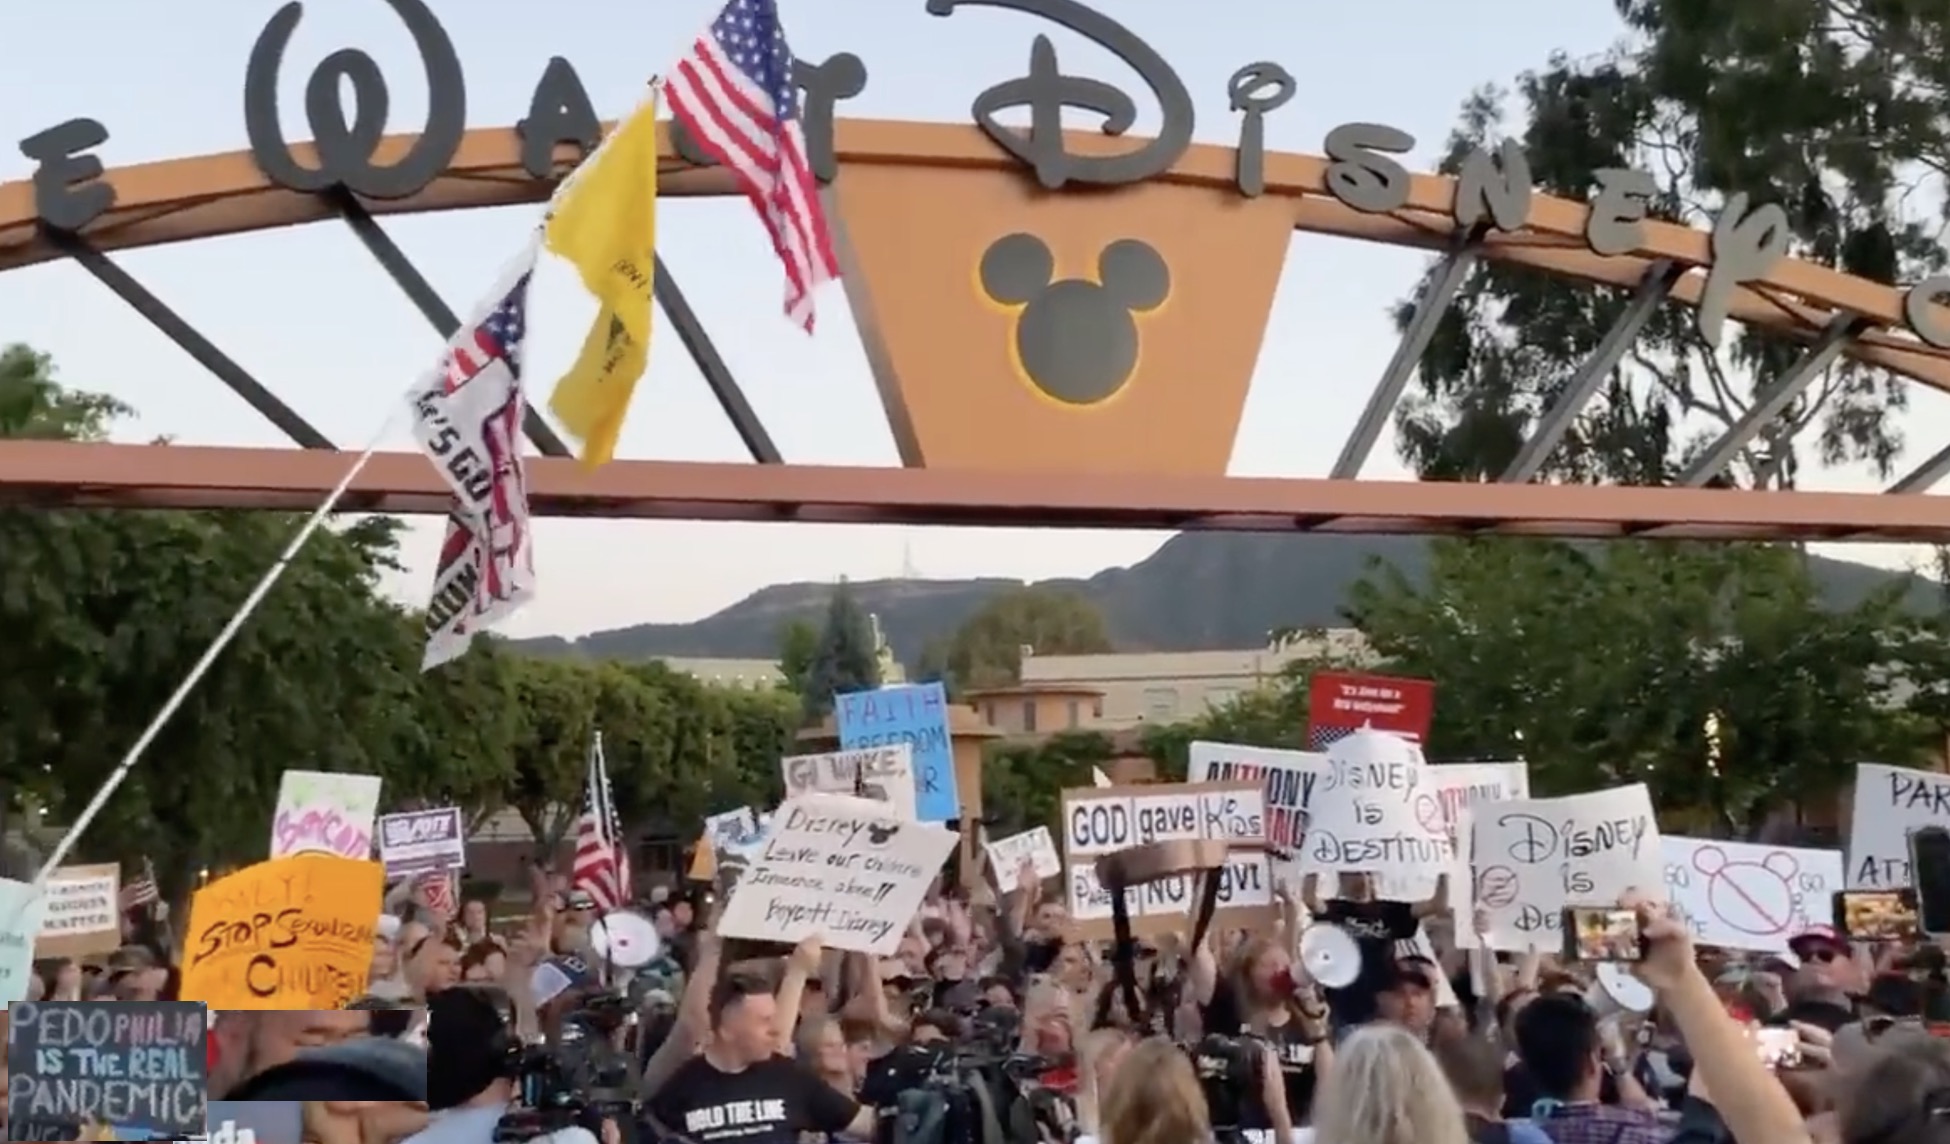 'BOYCOTT DISNEY!' Hundreds of Protesters Show Up at Disney HQ to